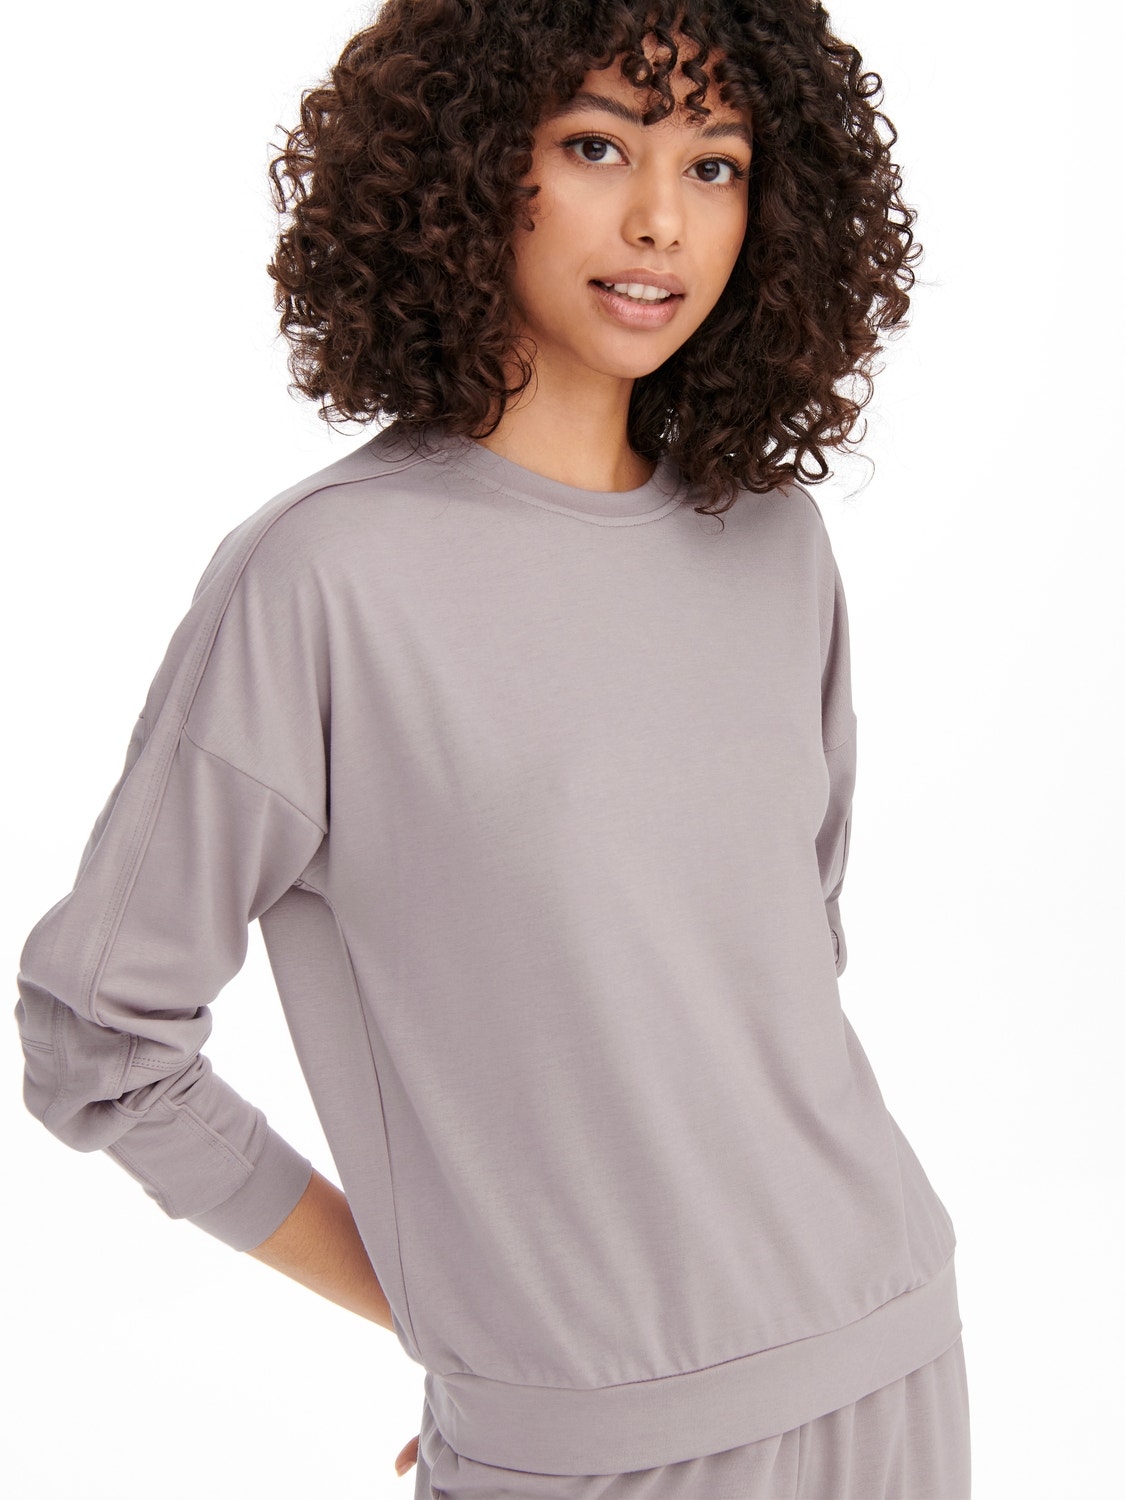 ONLY Long sleeved Training Top -Gull Gray - 15244742